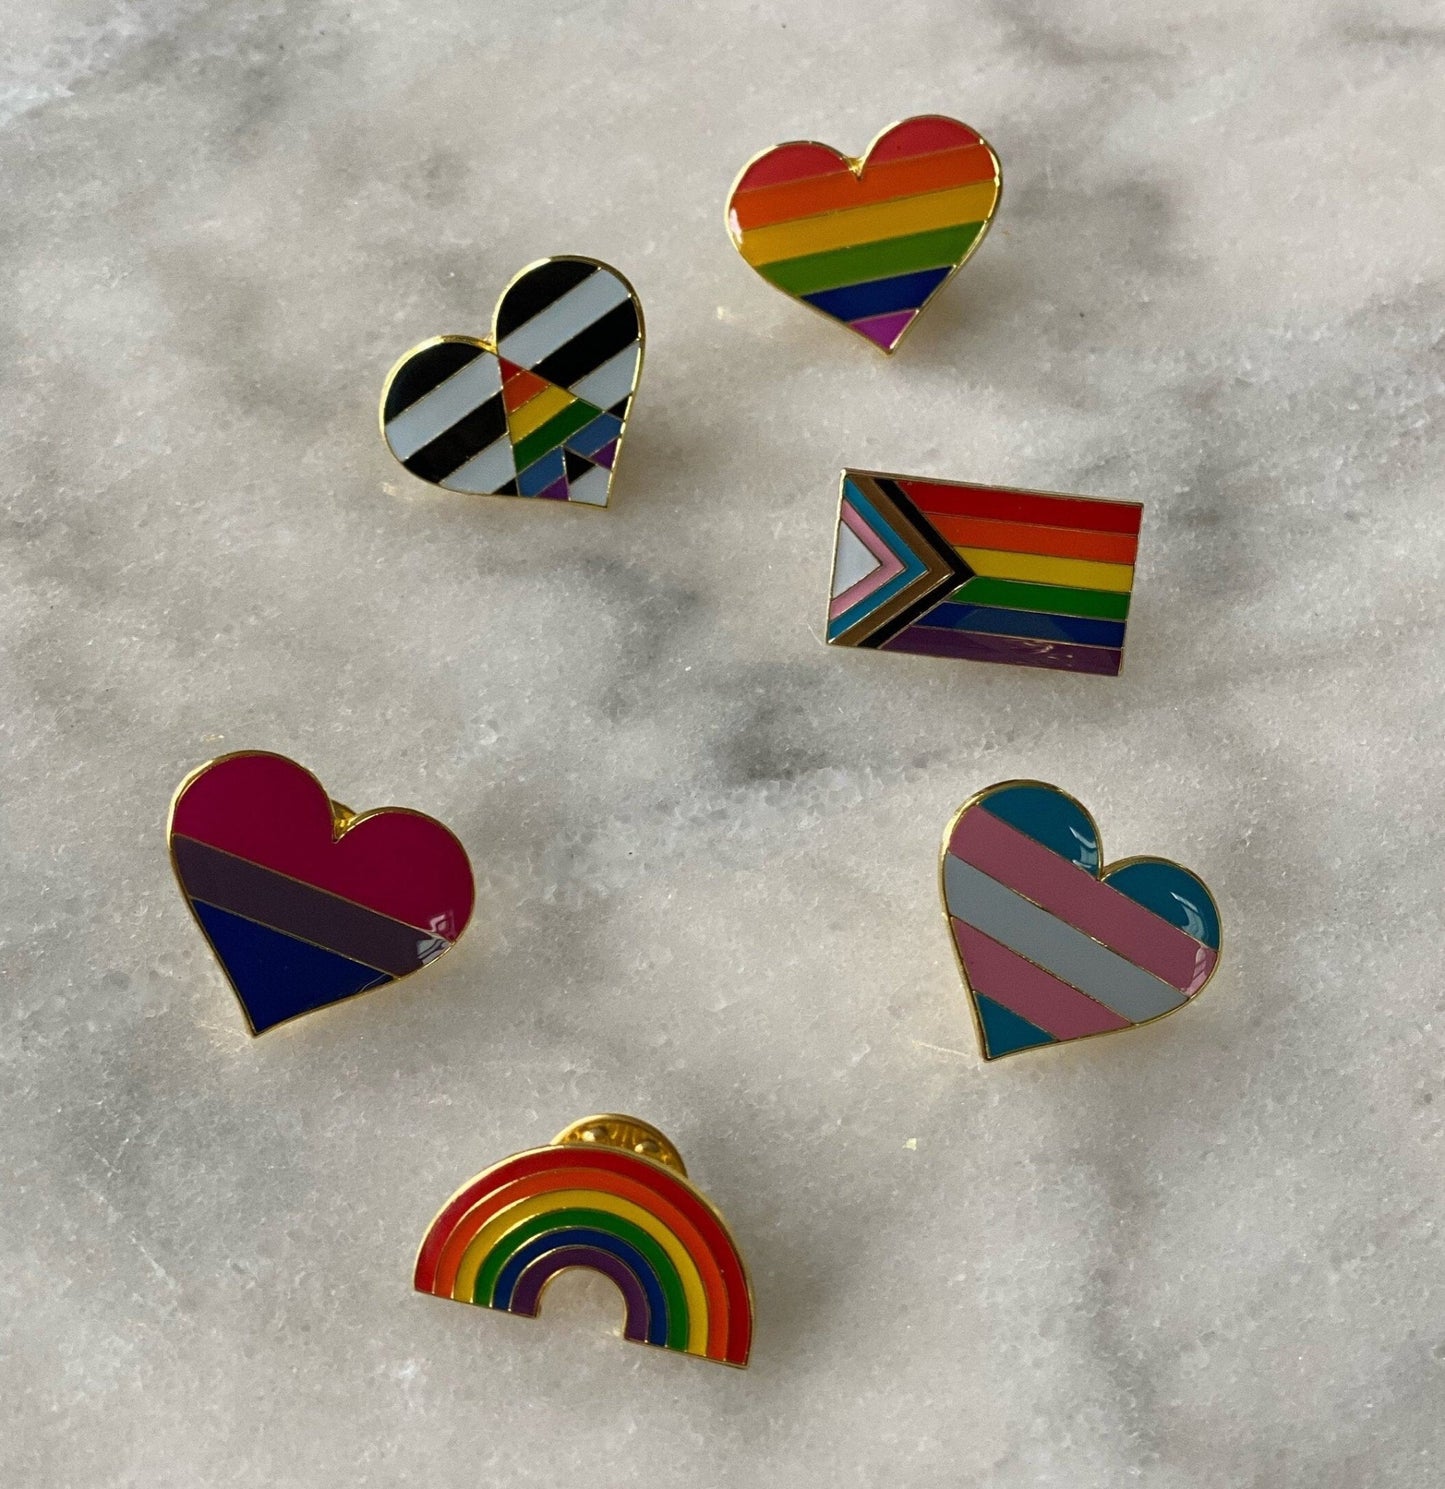 Straight Ally Heart Pride Flag Pins | Enameled LGBTQ Supporter Ally Equality Lapel Badge - ActivistChic